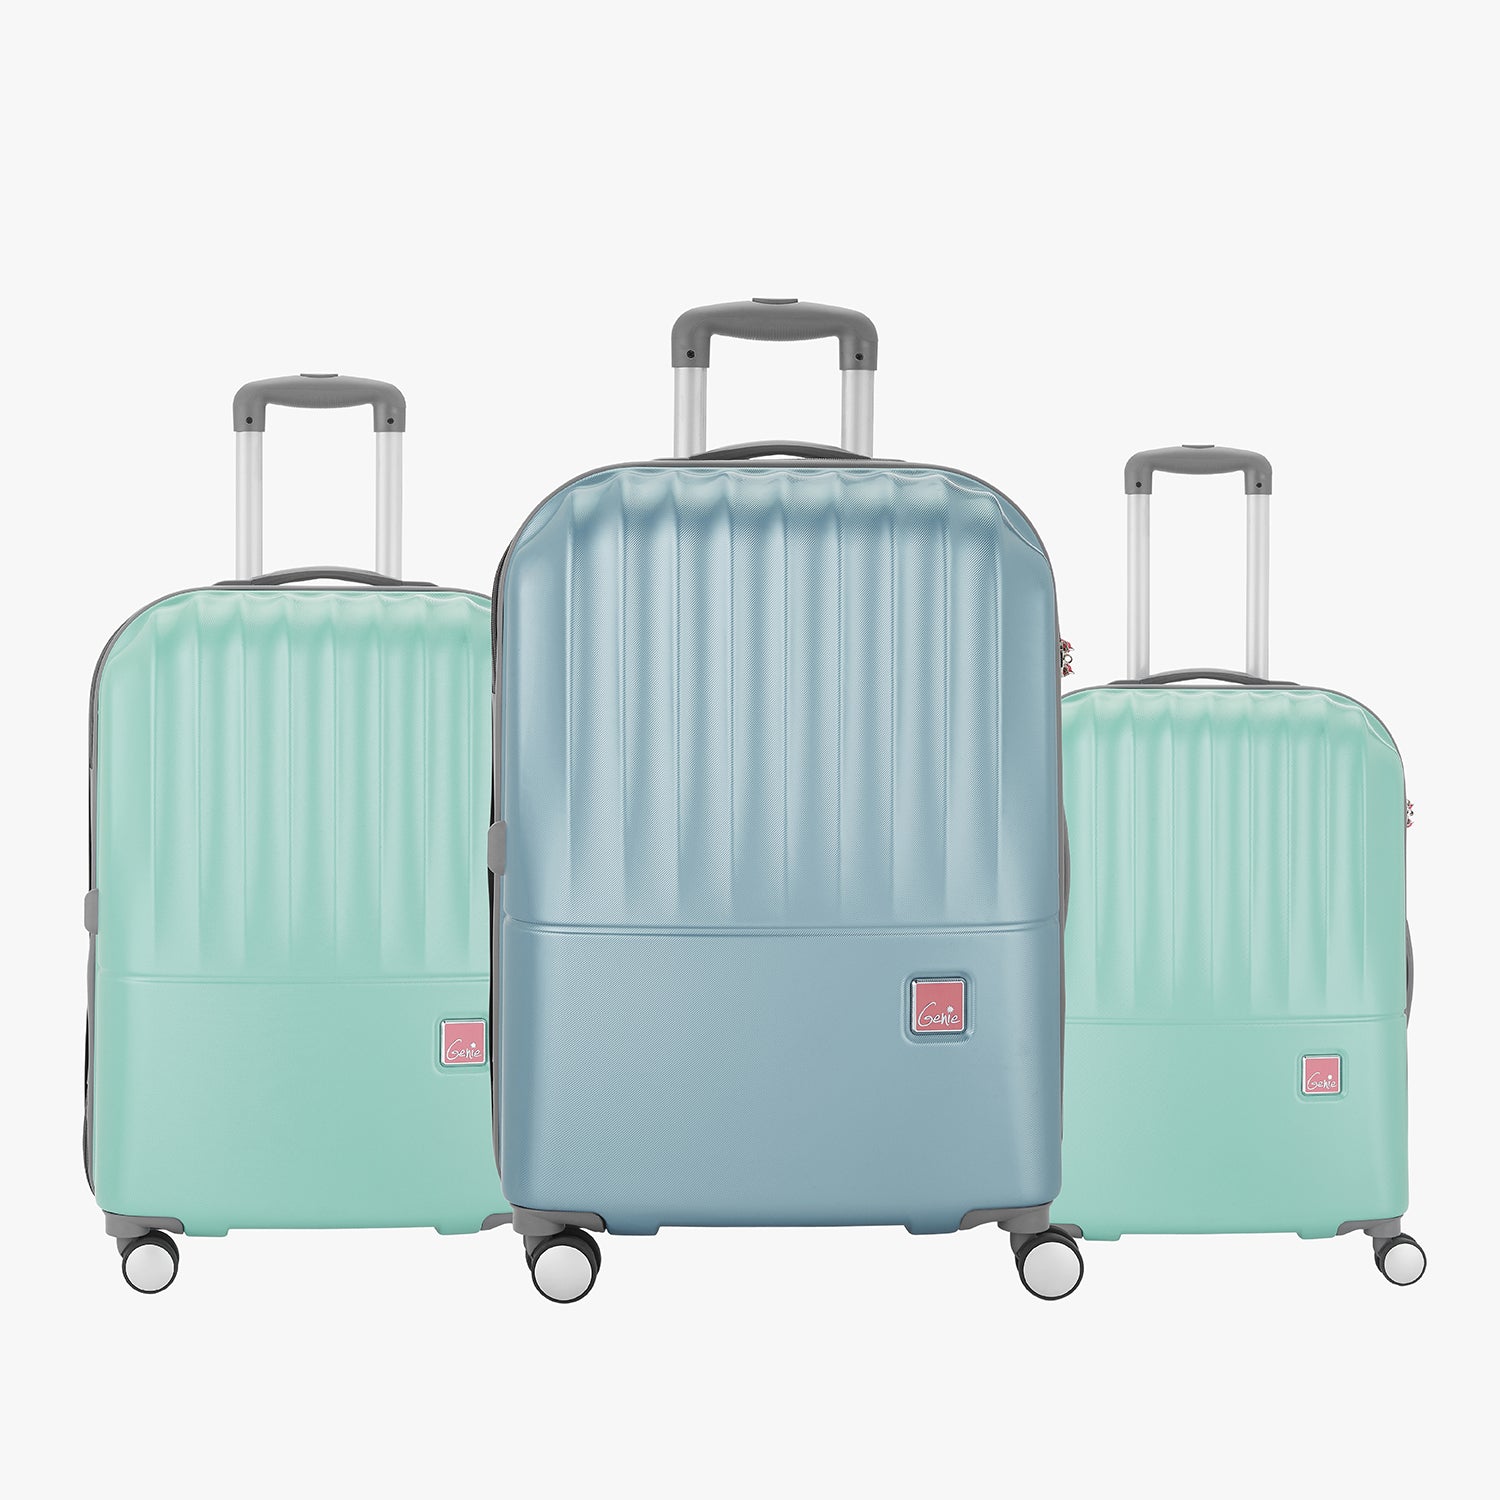 Genie Palm Set of 3 Trolley Bags With Dual Wheels